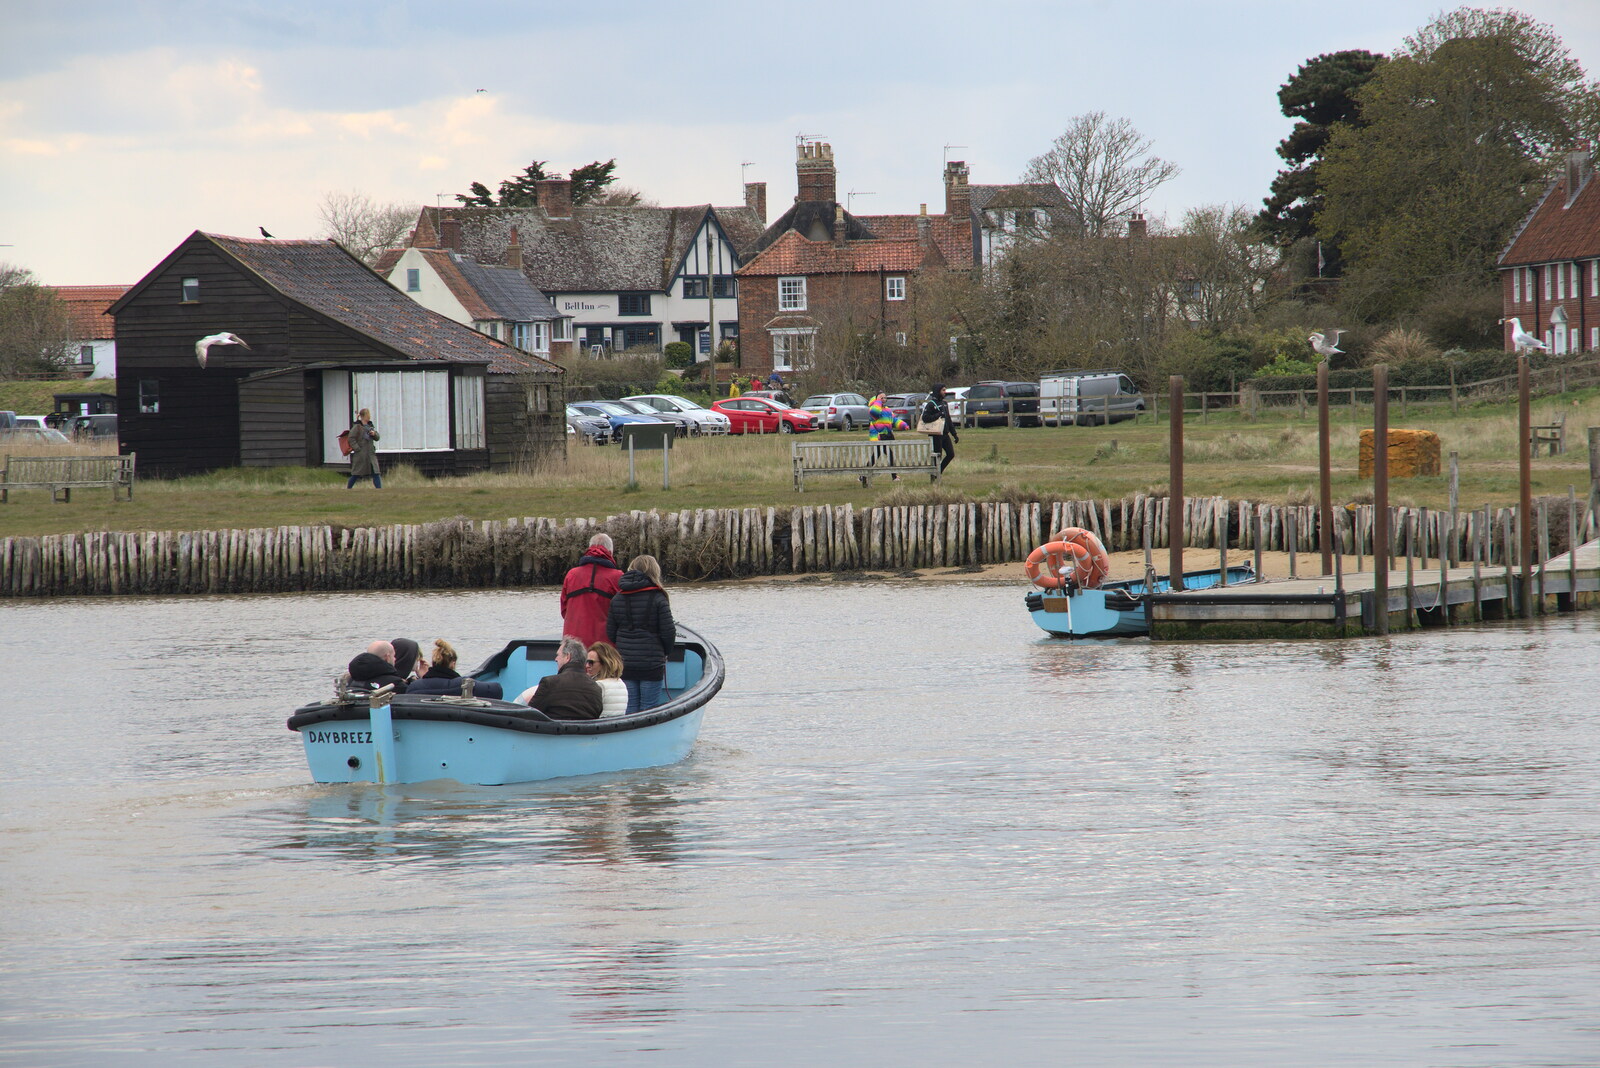 The ferry heads over the river to Walberswick from A Chilly Trip to the Beach, Southwold Harbour, Suffolk - 2nd May 2021